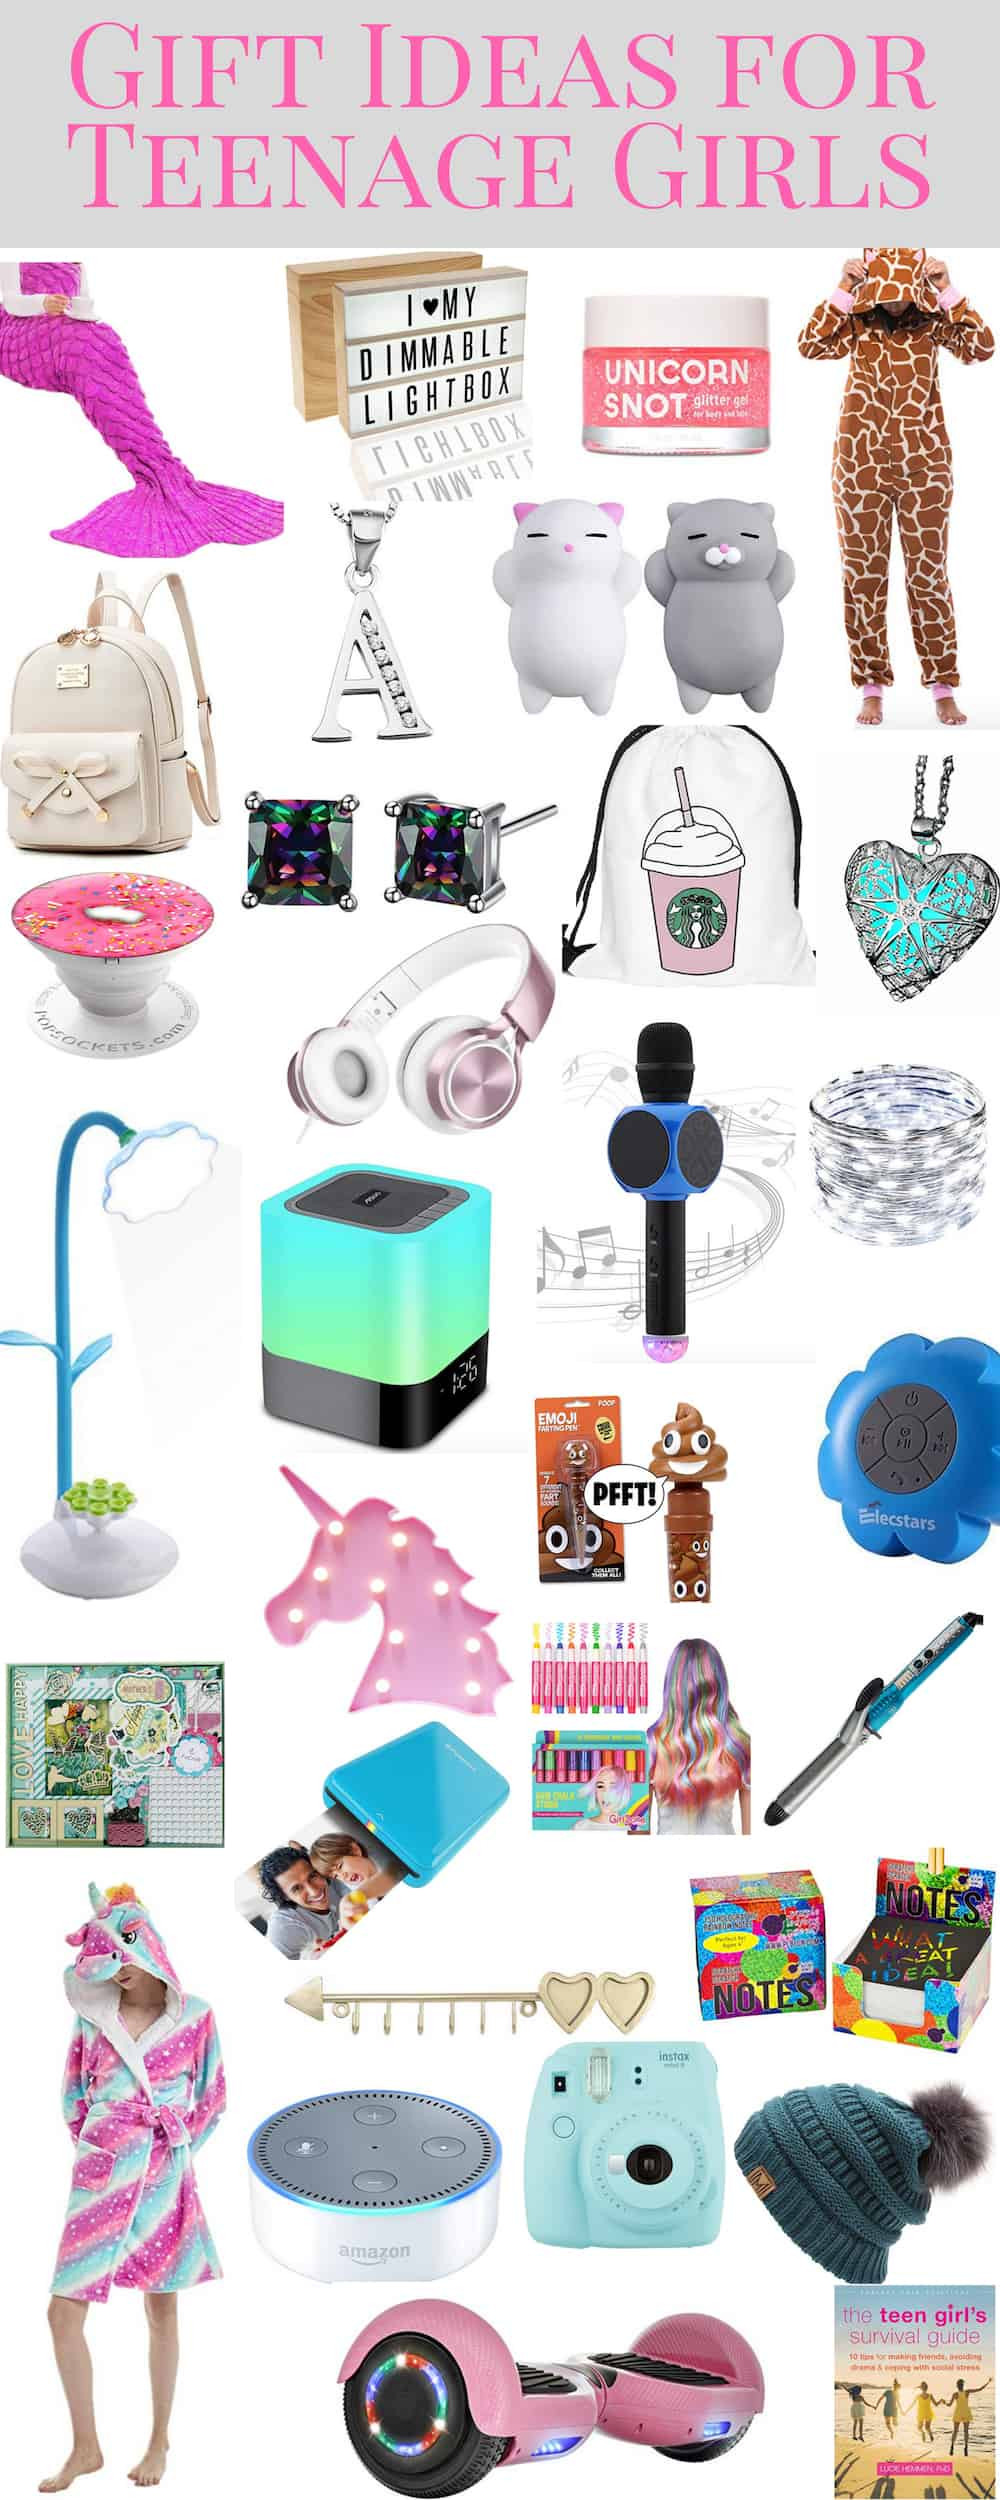 Teenage Gift Ideas For Girls
 Gift Ideas for Tween and Teen Girls ourkindofcrazy